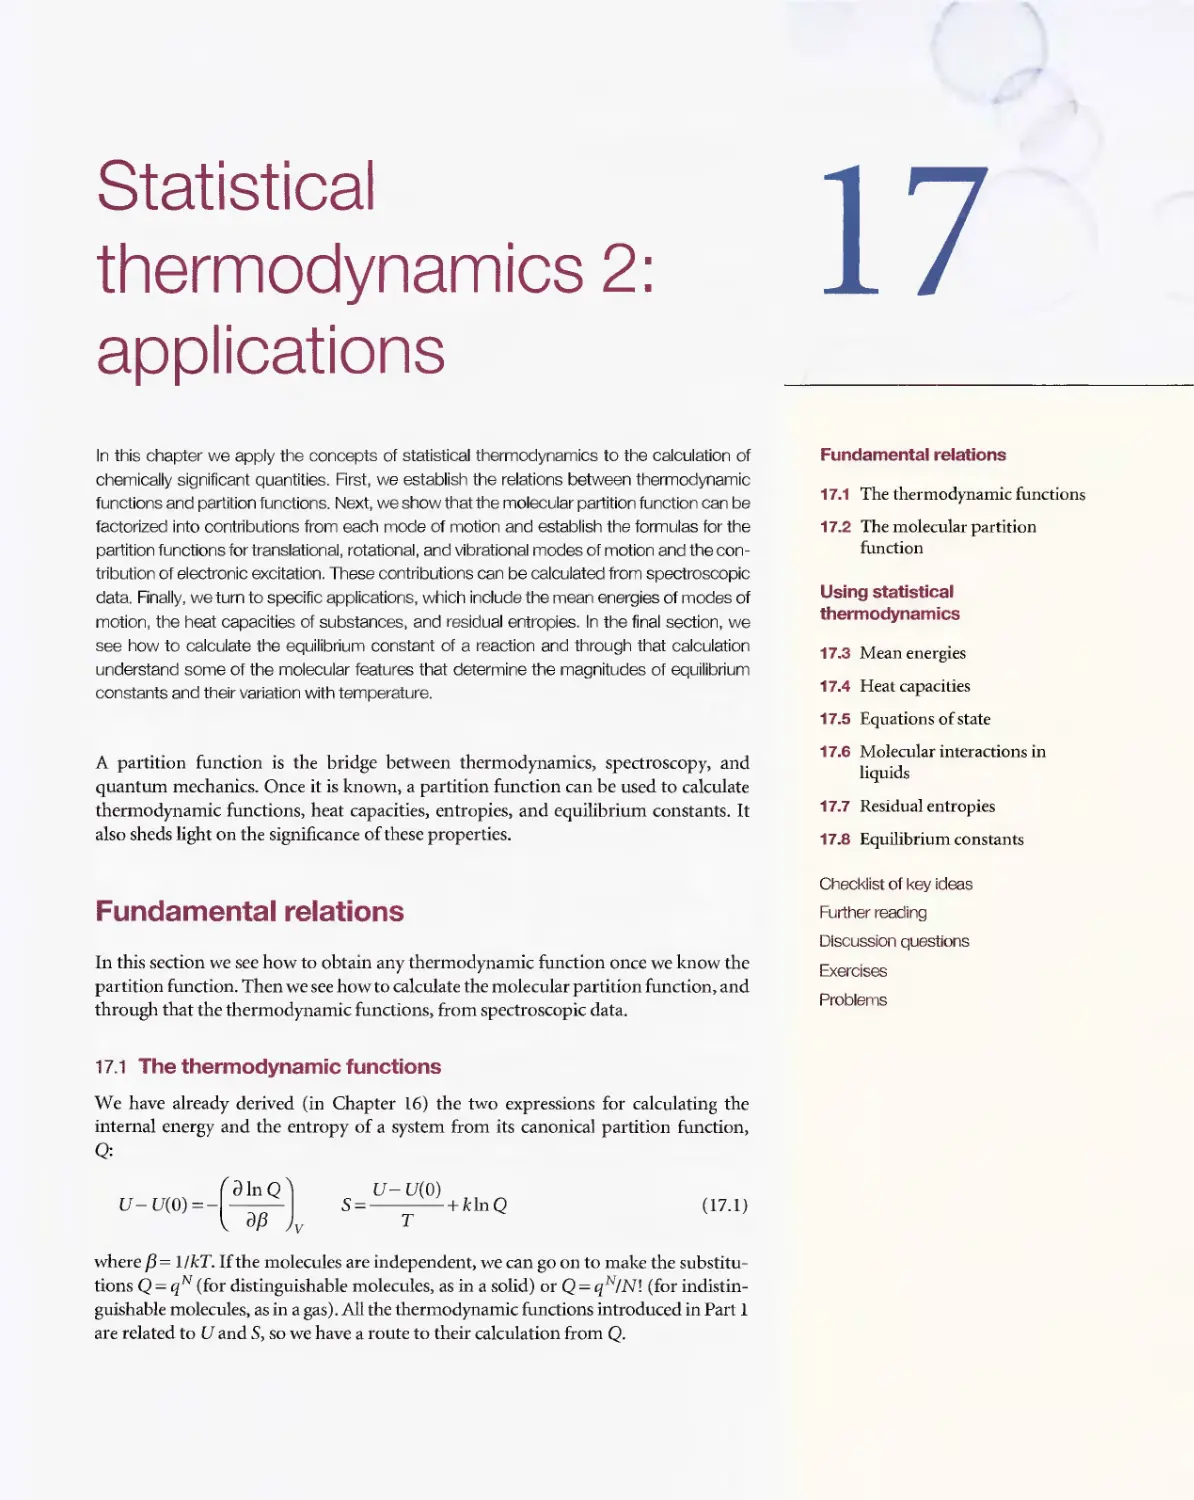 17 - Statistical thermodynamics 2 - Applications